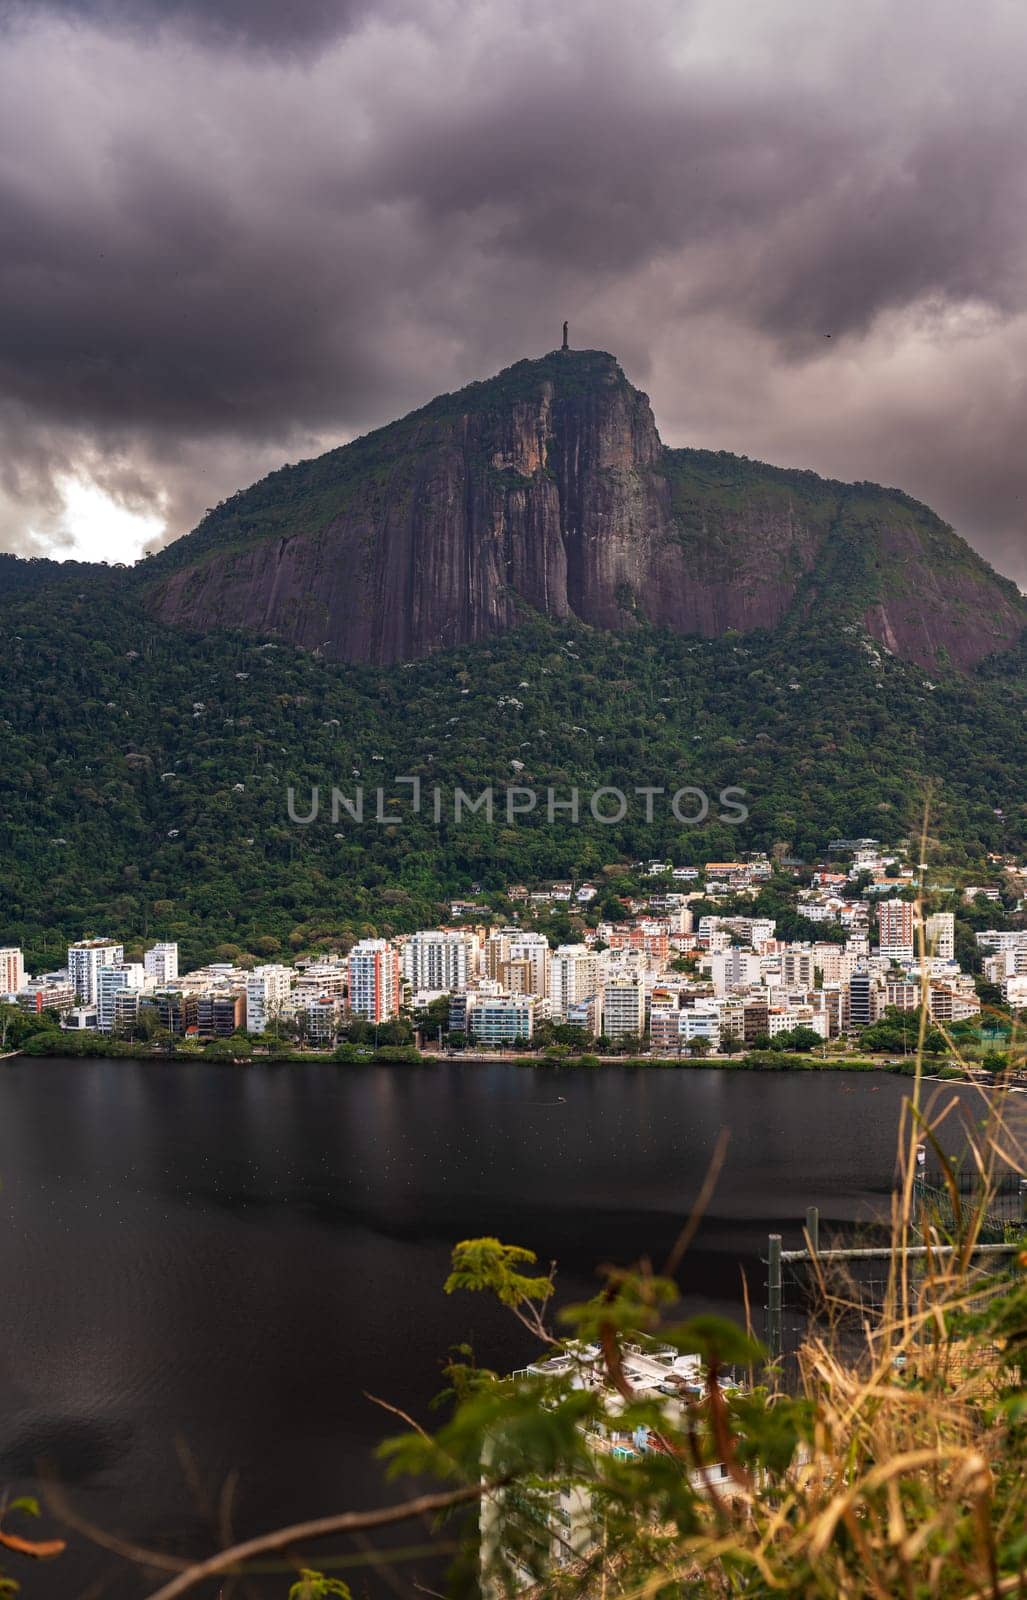 Cloudy Sky Over Iconic Mountain and Lake in Vibrant City by FerradalFCG